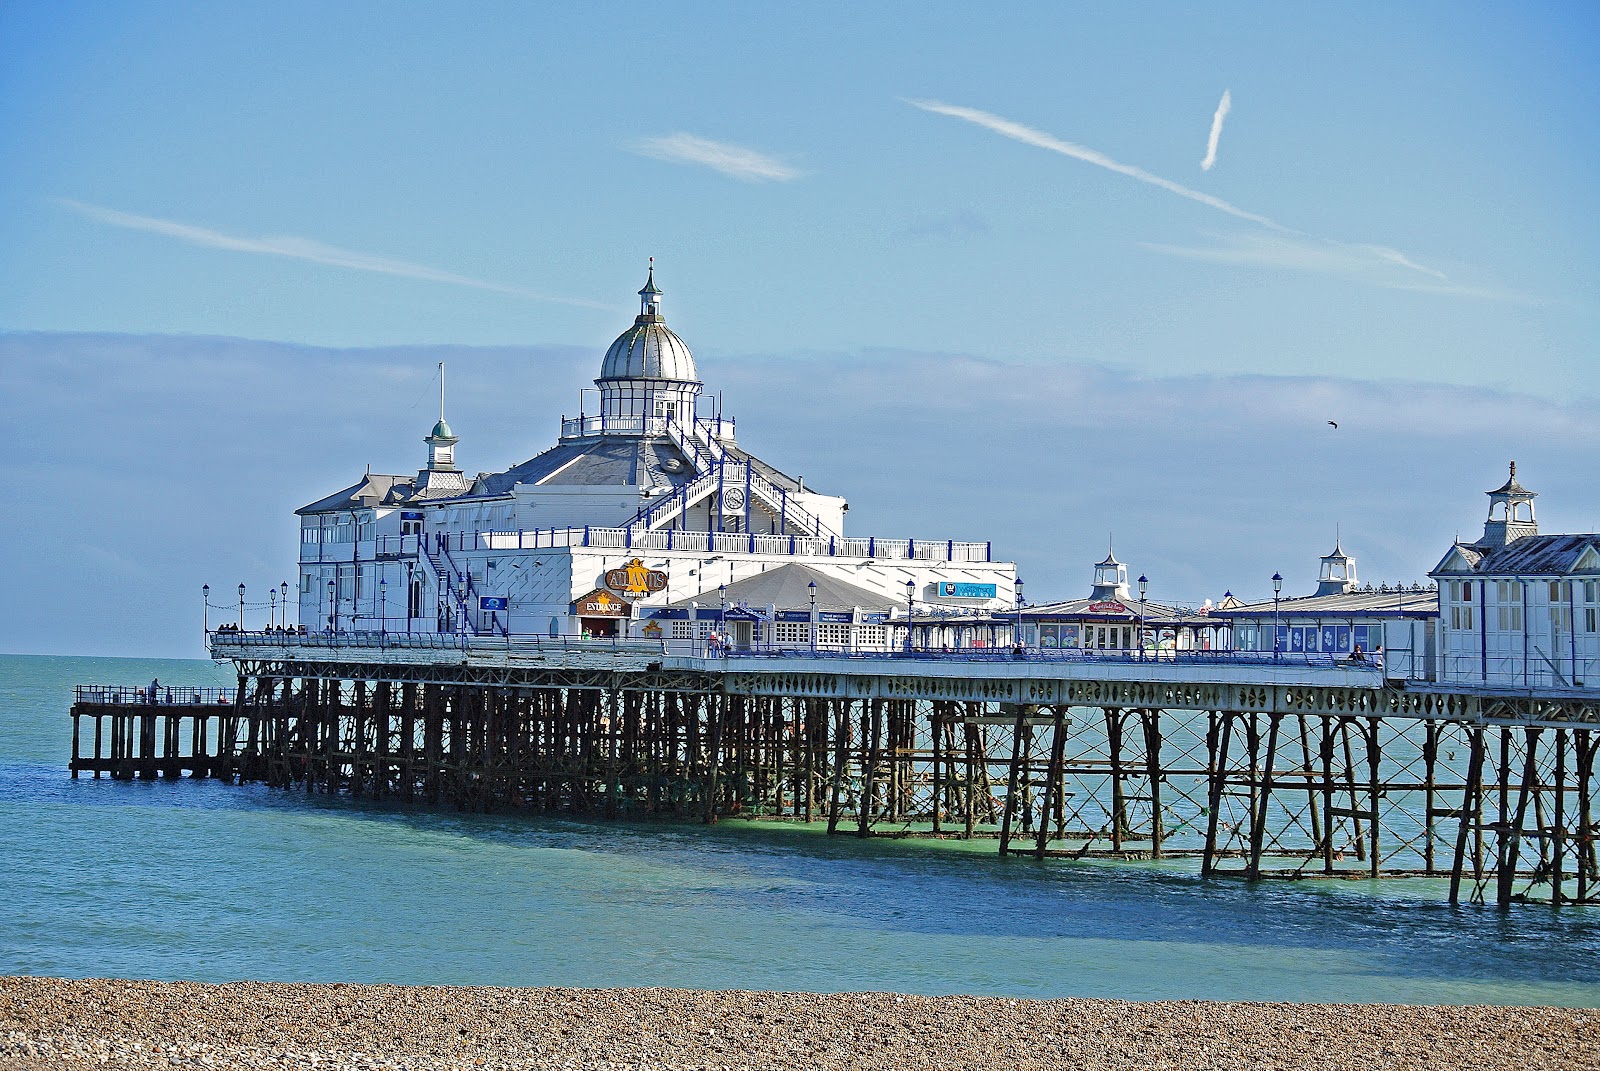 Our Stay in Eastbourne: BEAUTIFUL IMPRESSIONS, THE PIER